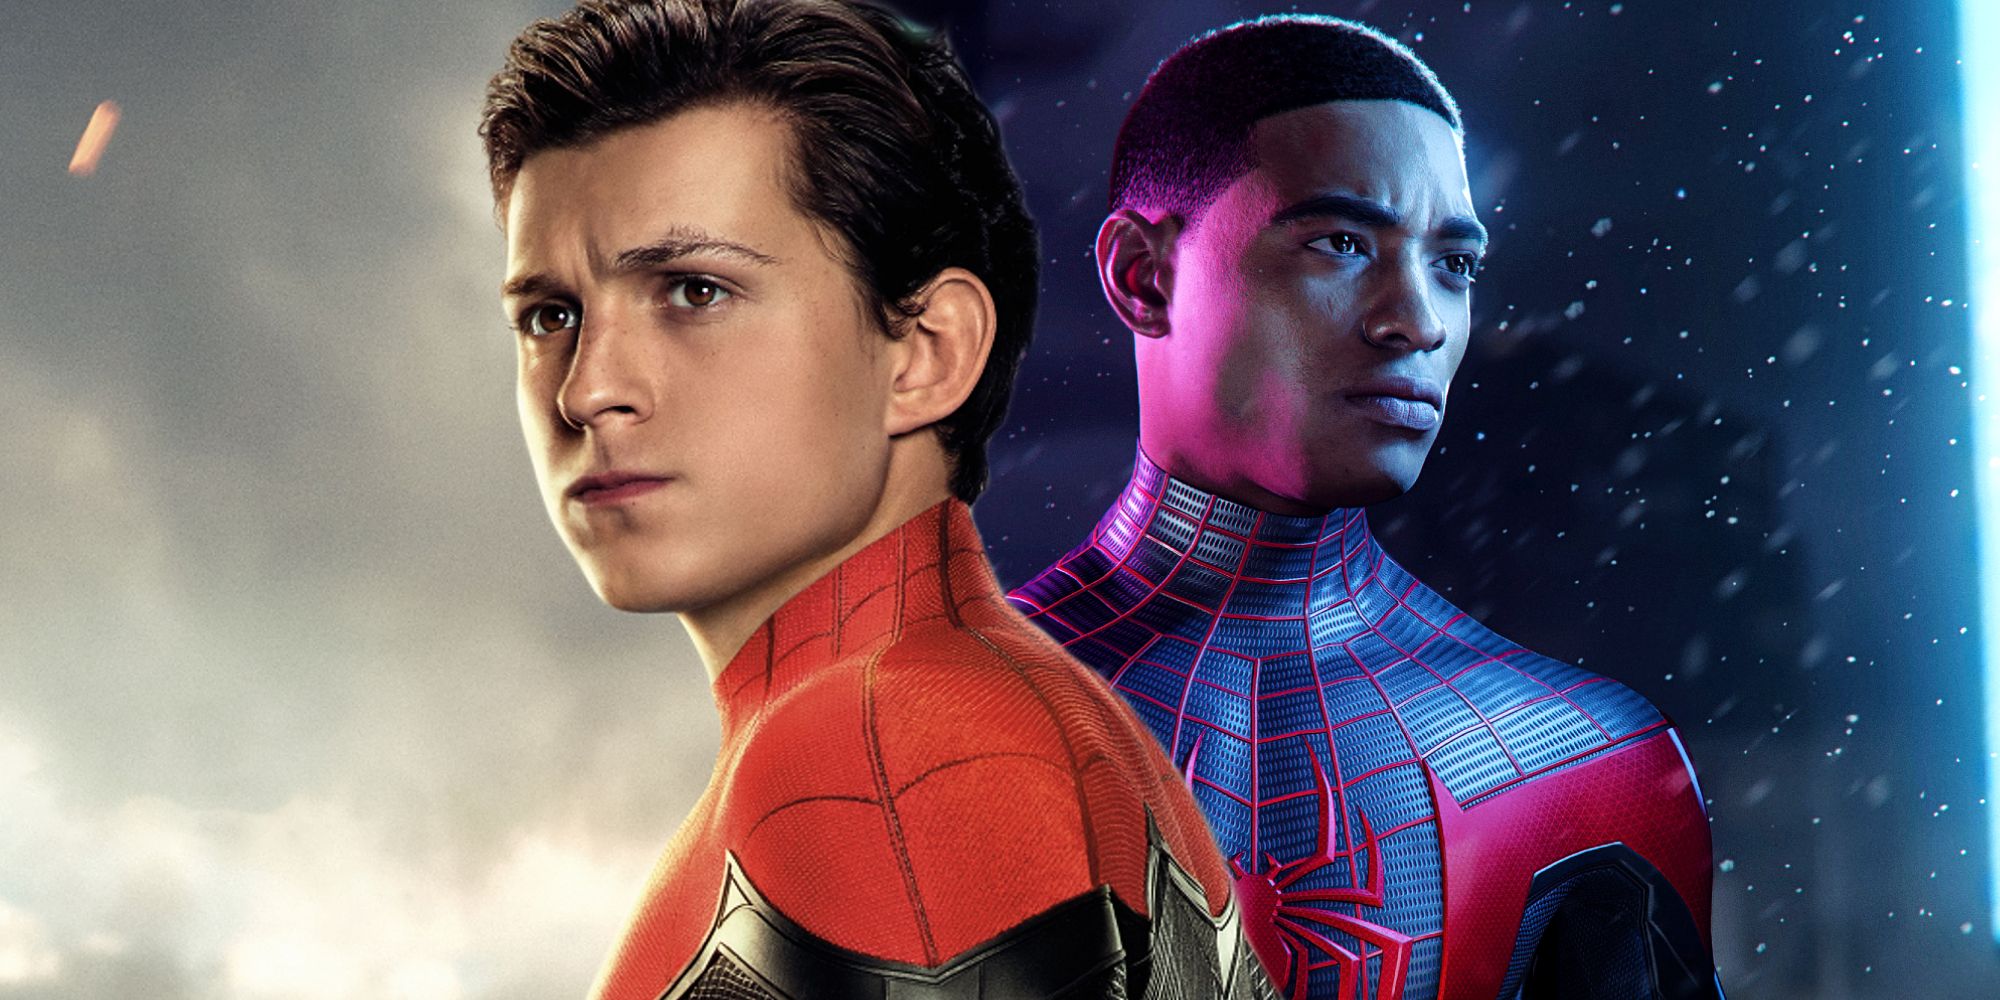 Split image of Spider-Man and Miles Morales